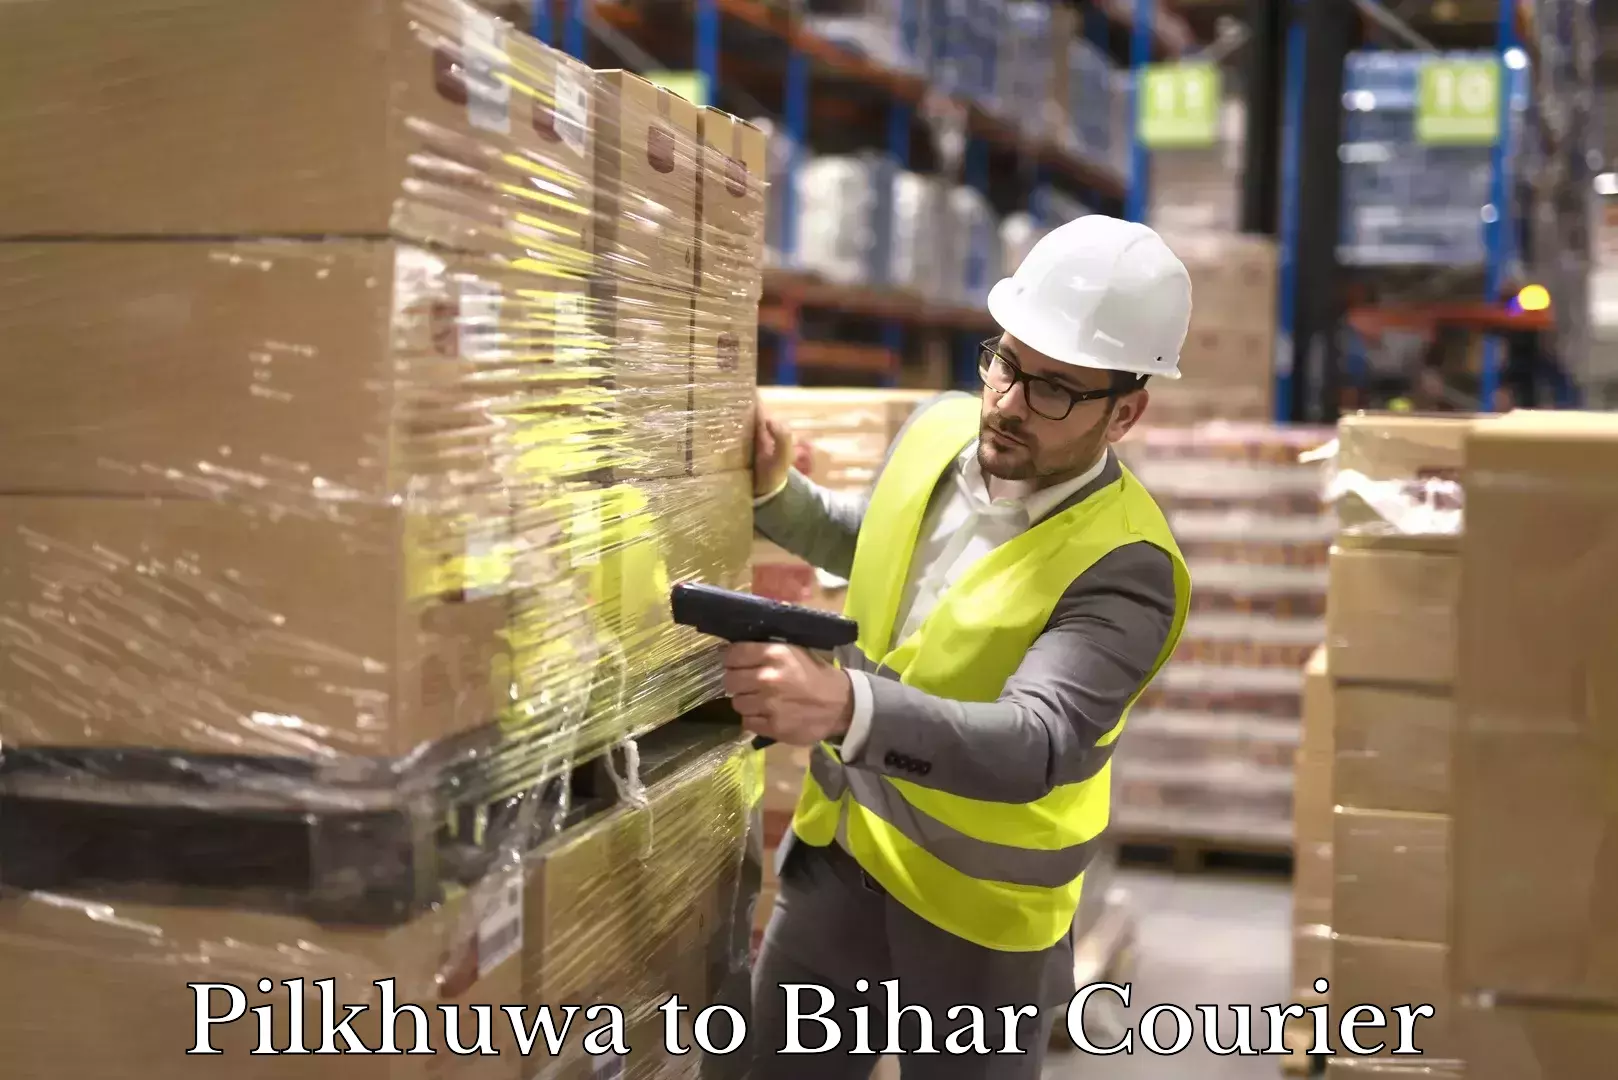 Secure package delivery in Pilkhuwa to Bihar